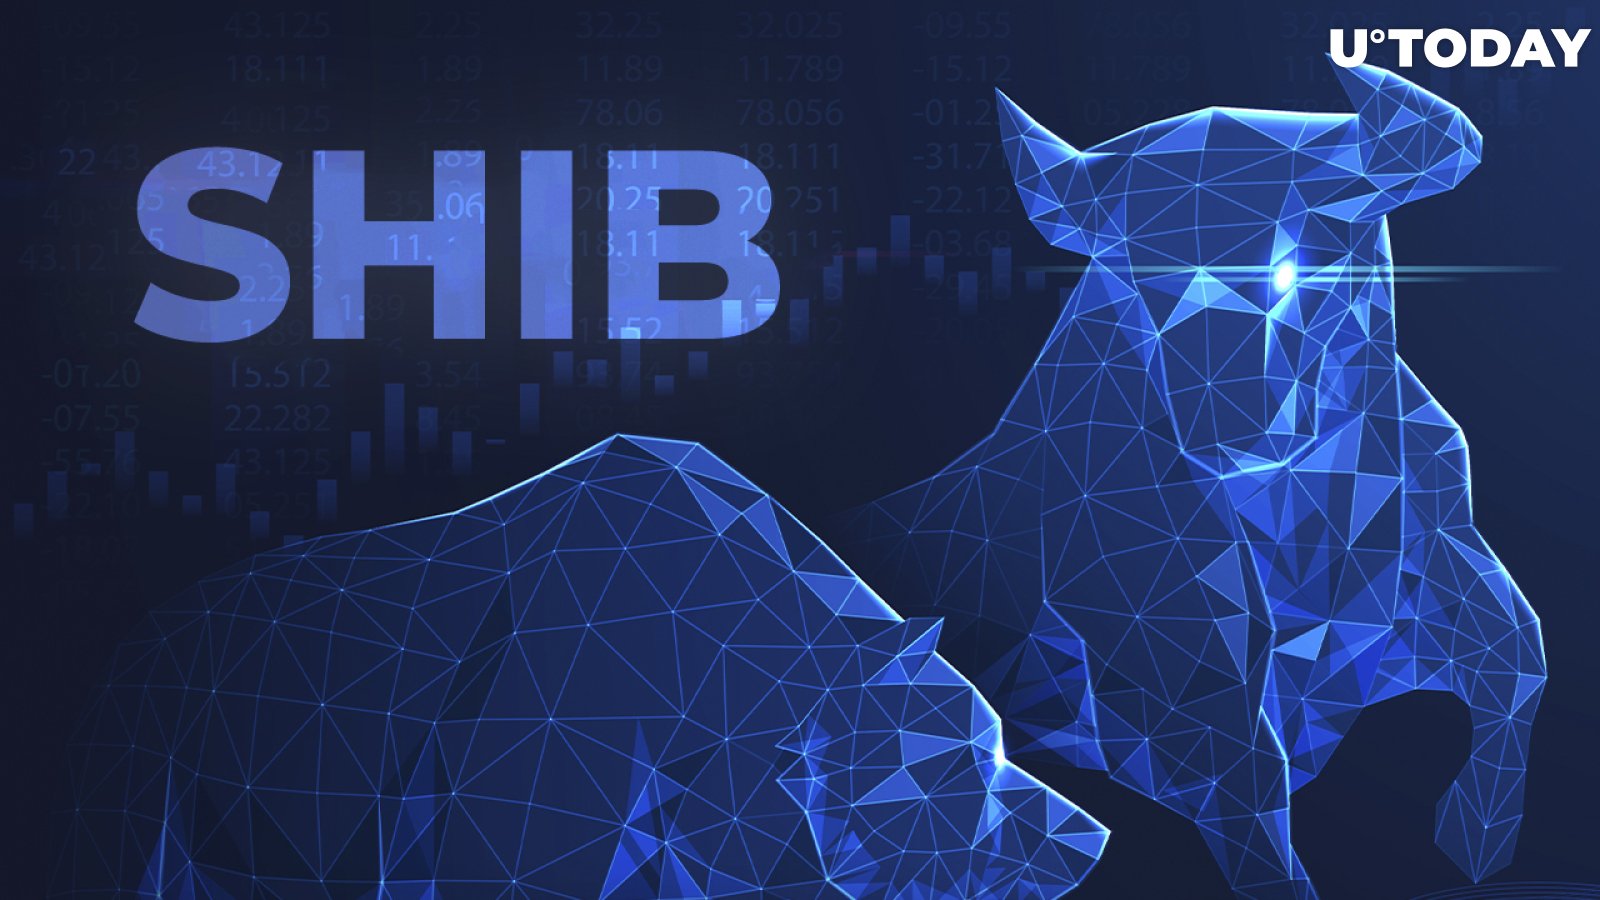 This Is What Shiba Inu Bulls and Bears Indicator Says About SHIB Price Action